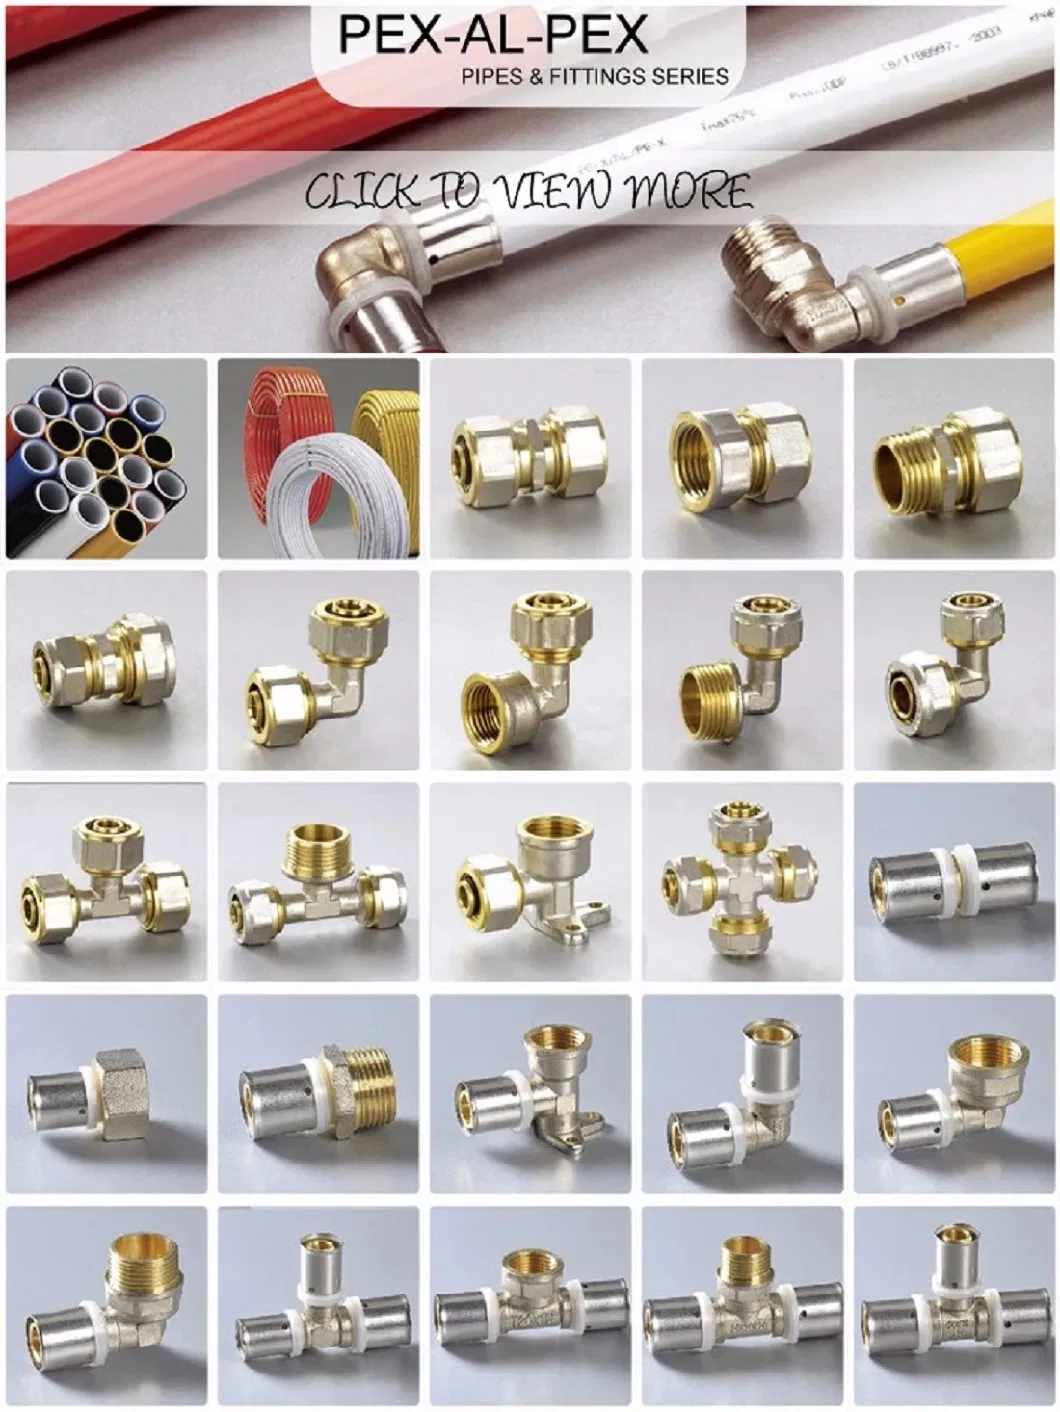 Floating Durable High Quality Water Level Industrial Brass Ball Floating Valve